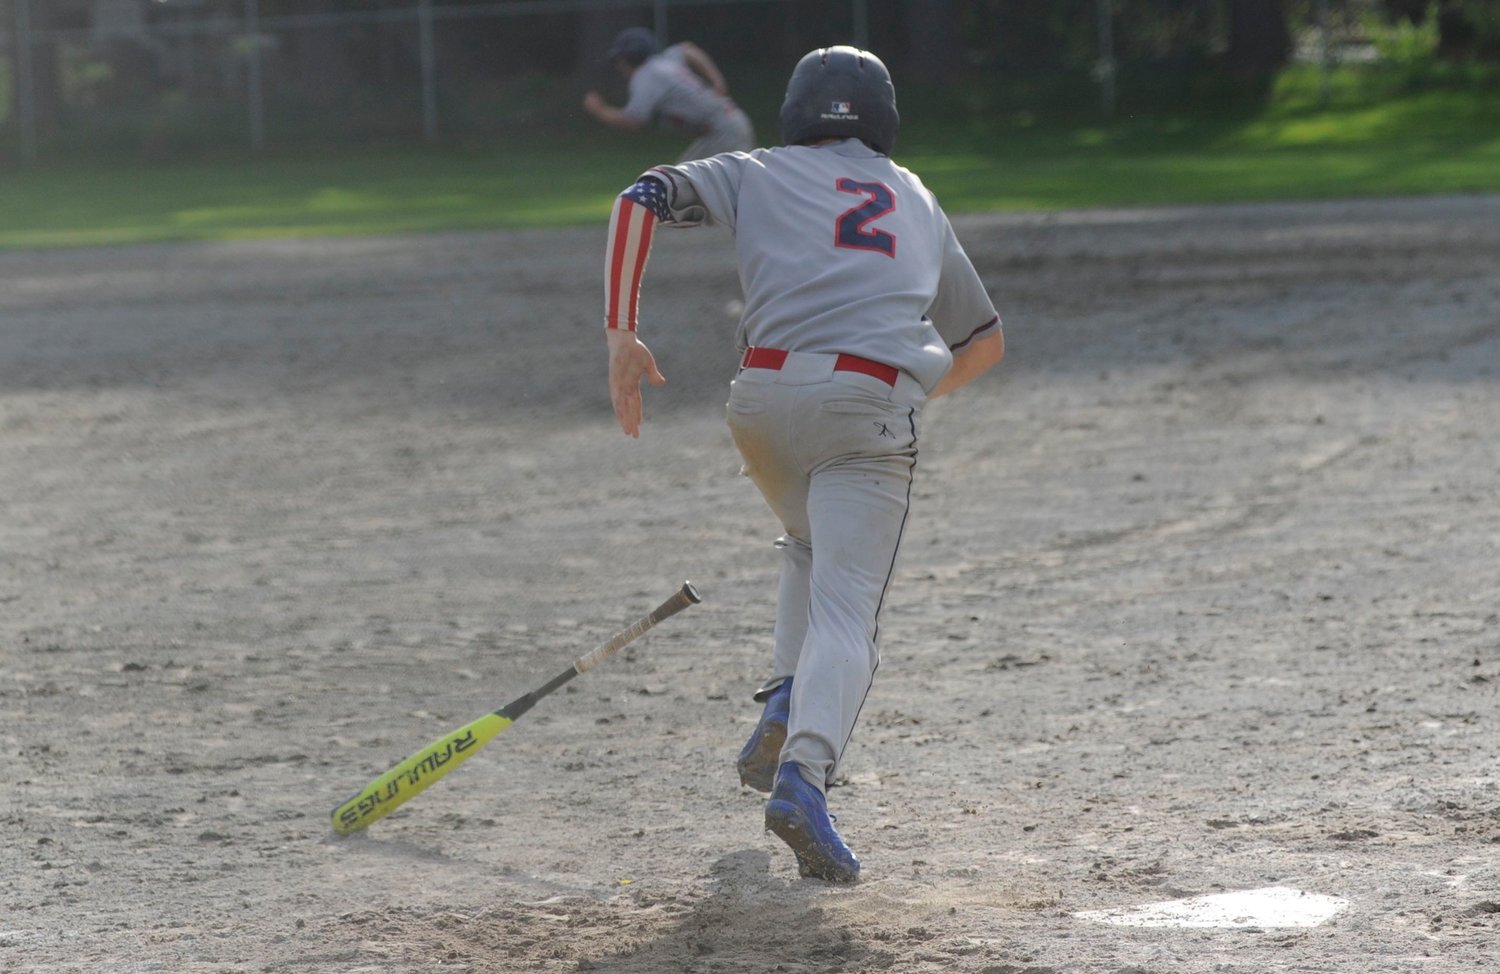 Sprint to first. Tri-Valley’s Austin Hartman legs it to first base while showing his patriotic colors.